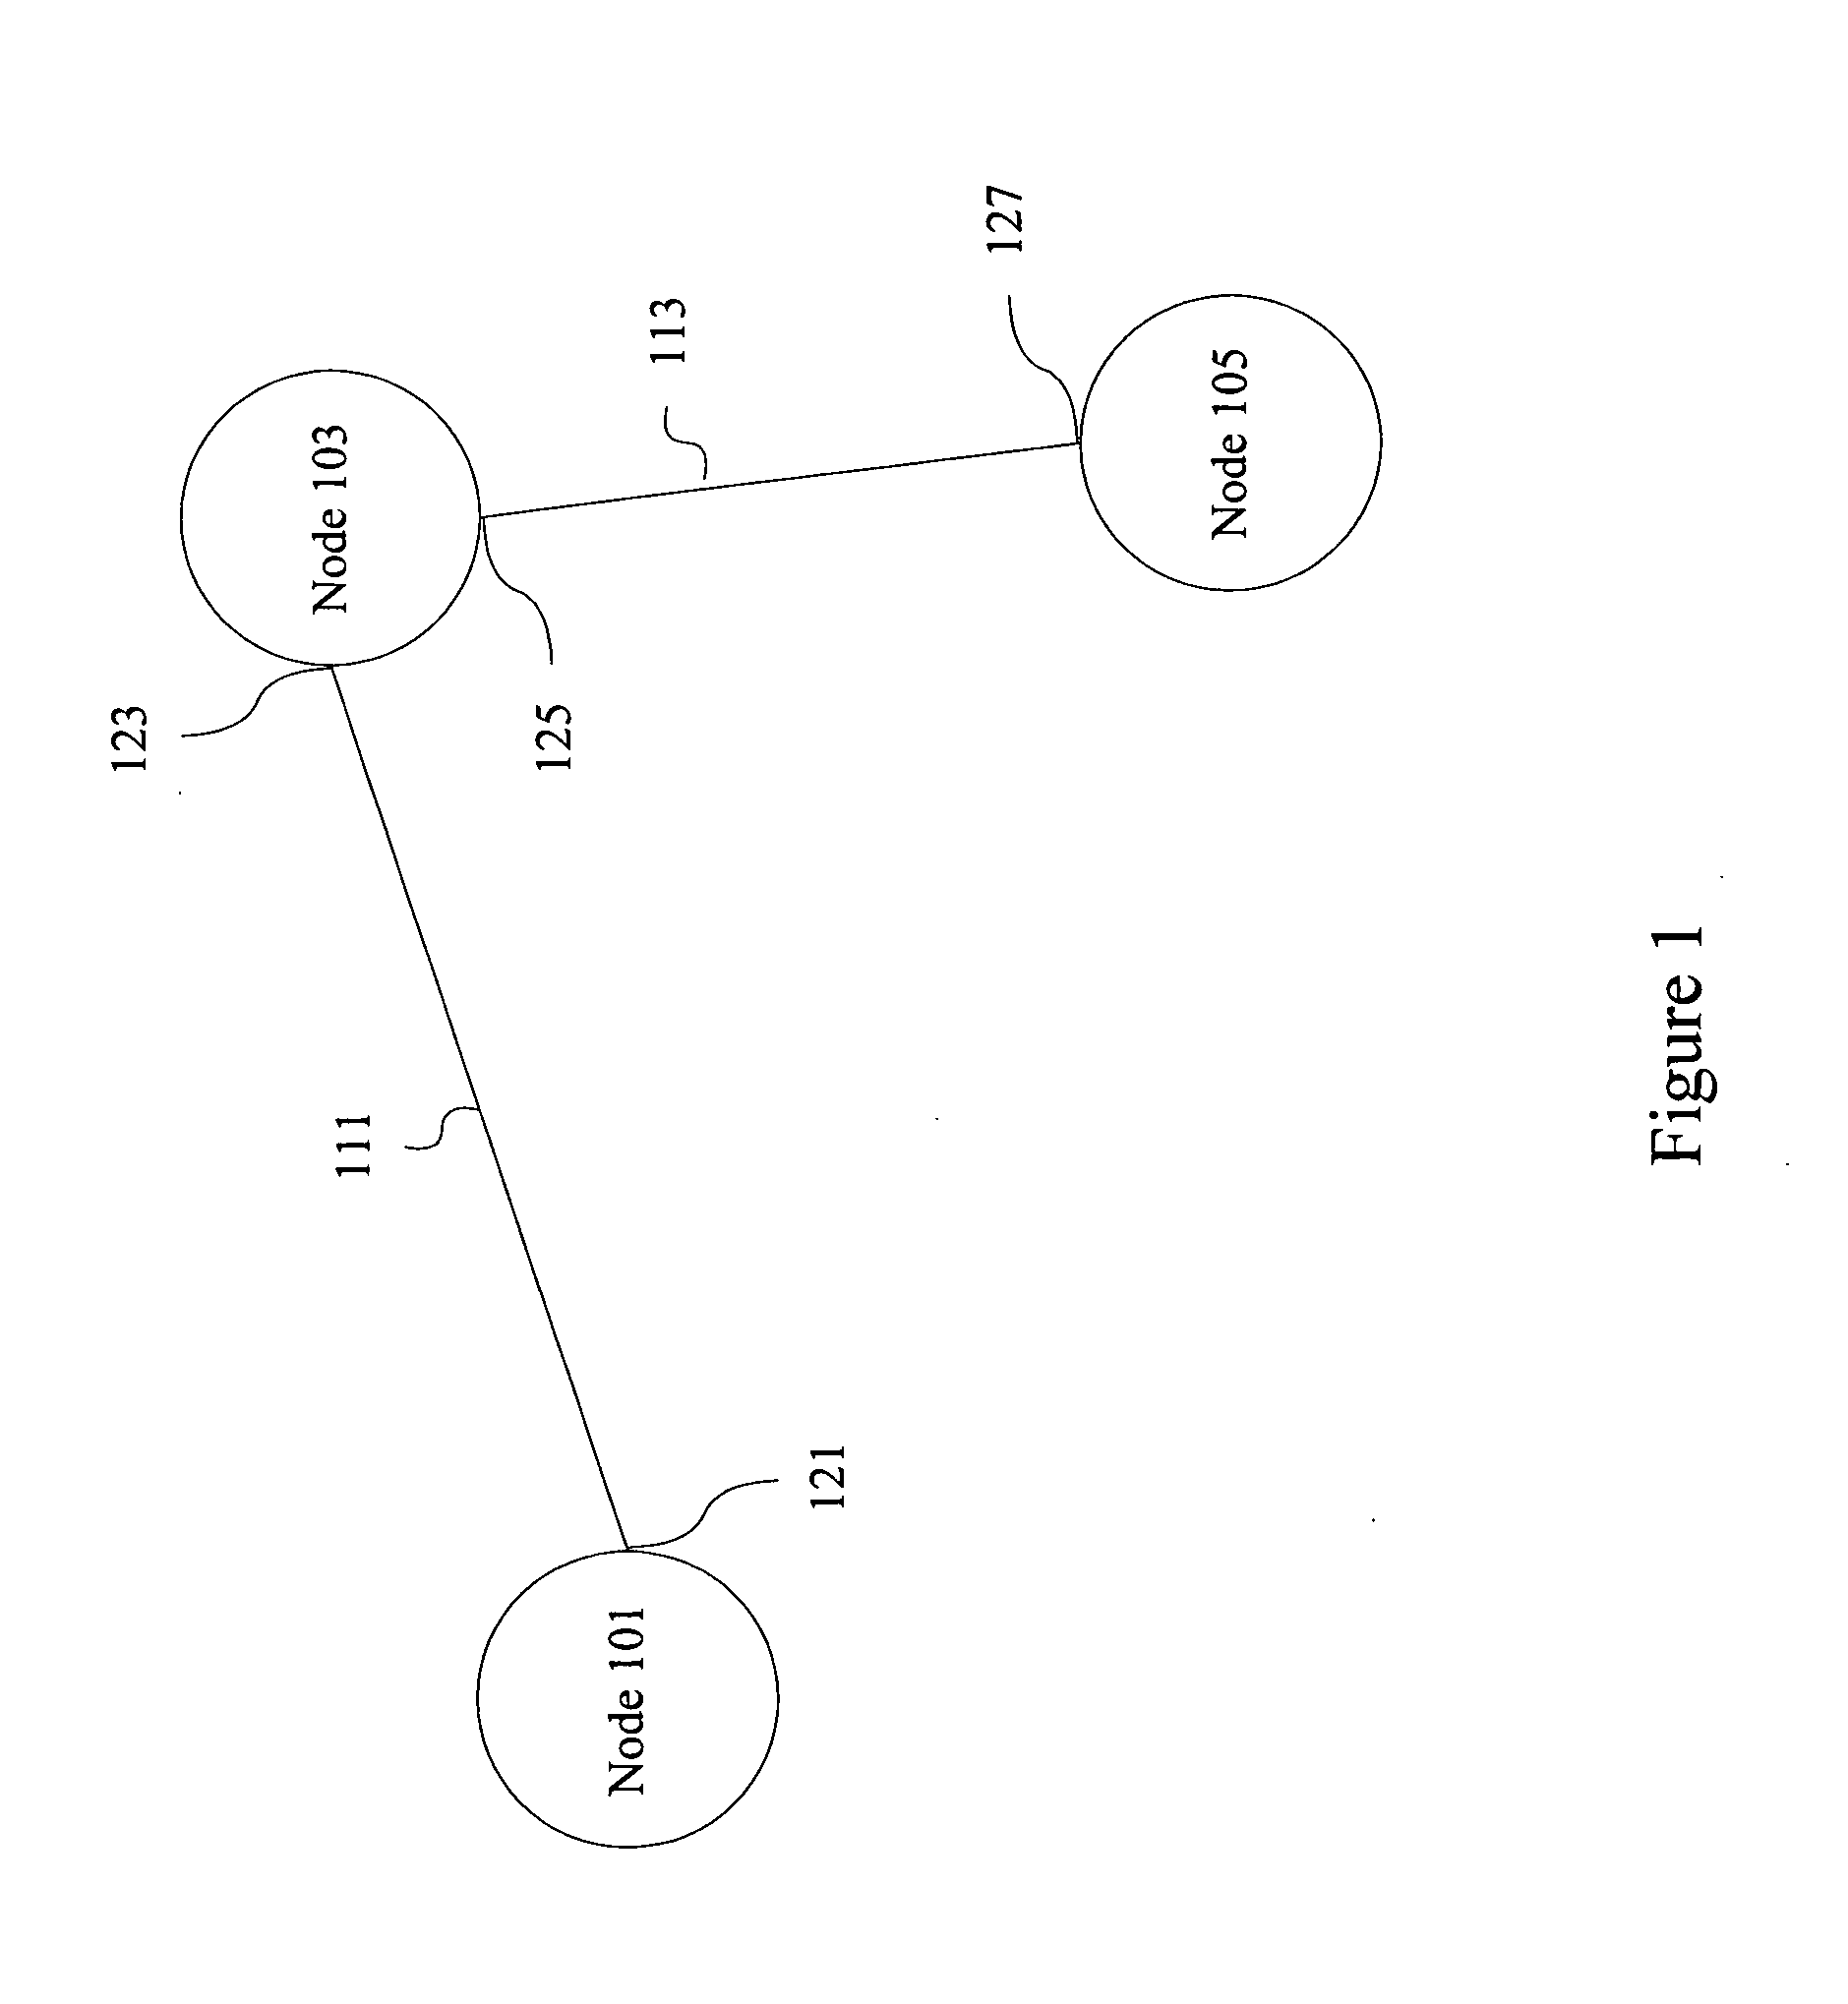 Preventing transient loops in broadcast/multicast trees during distribution of link state information